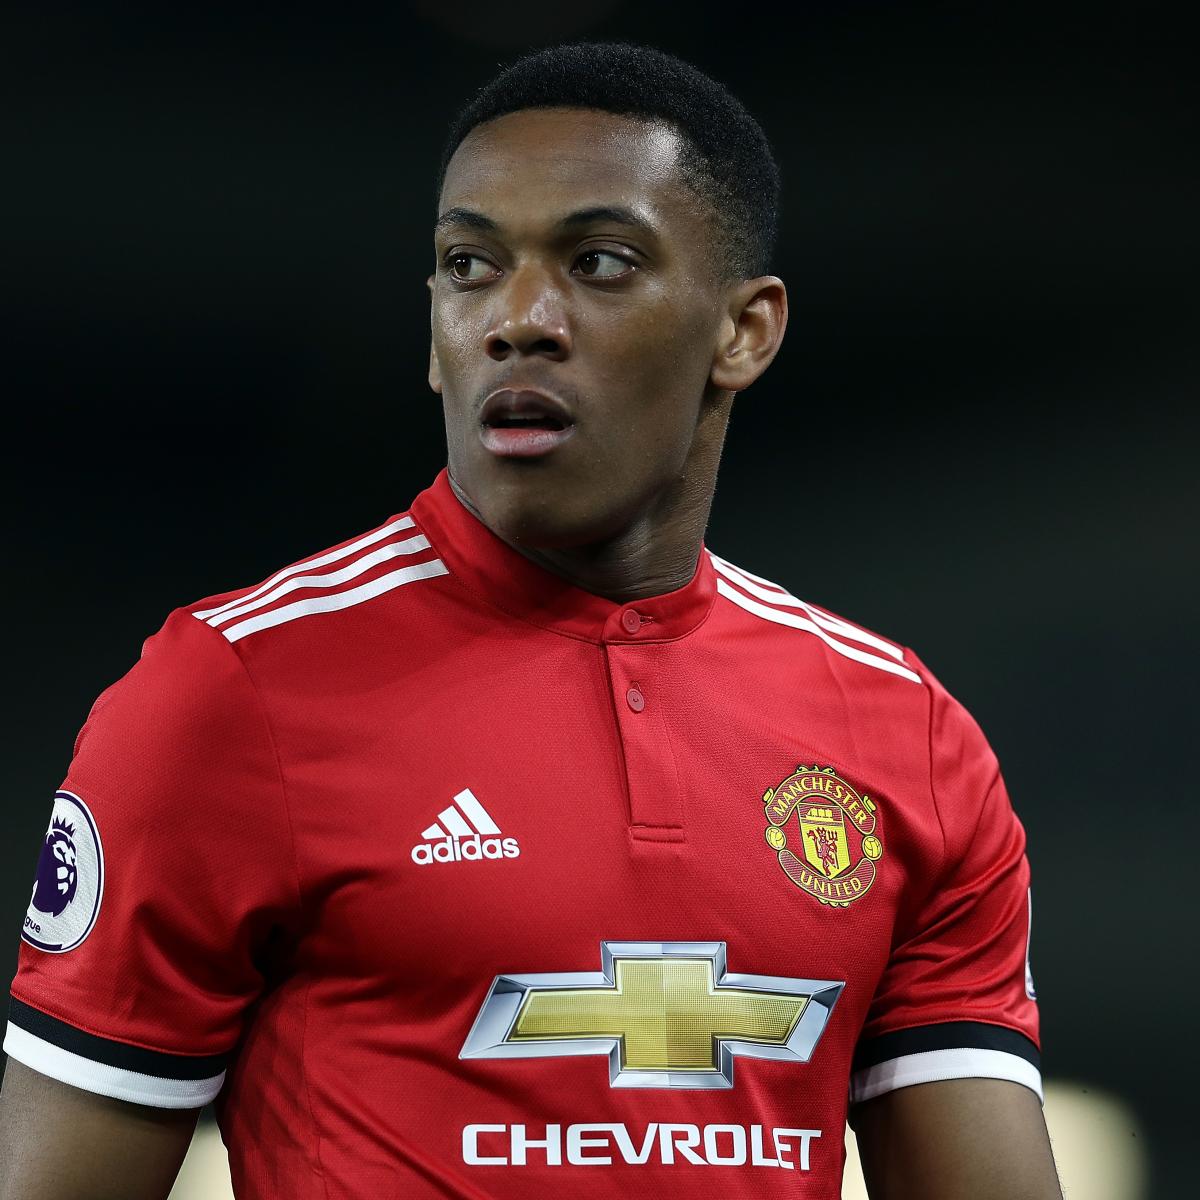 Manchester United Transfer News: Latest Anthony Martial Exit Rumours